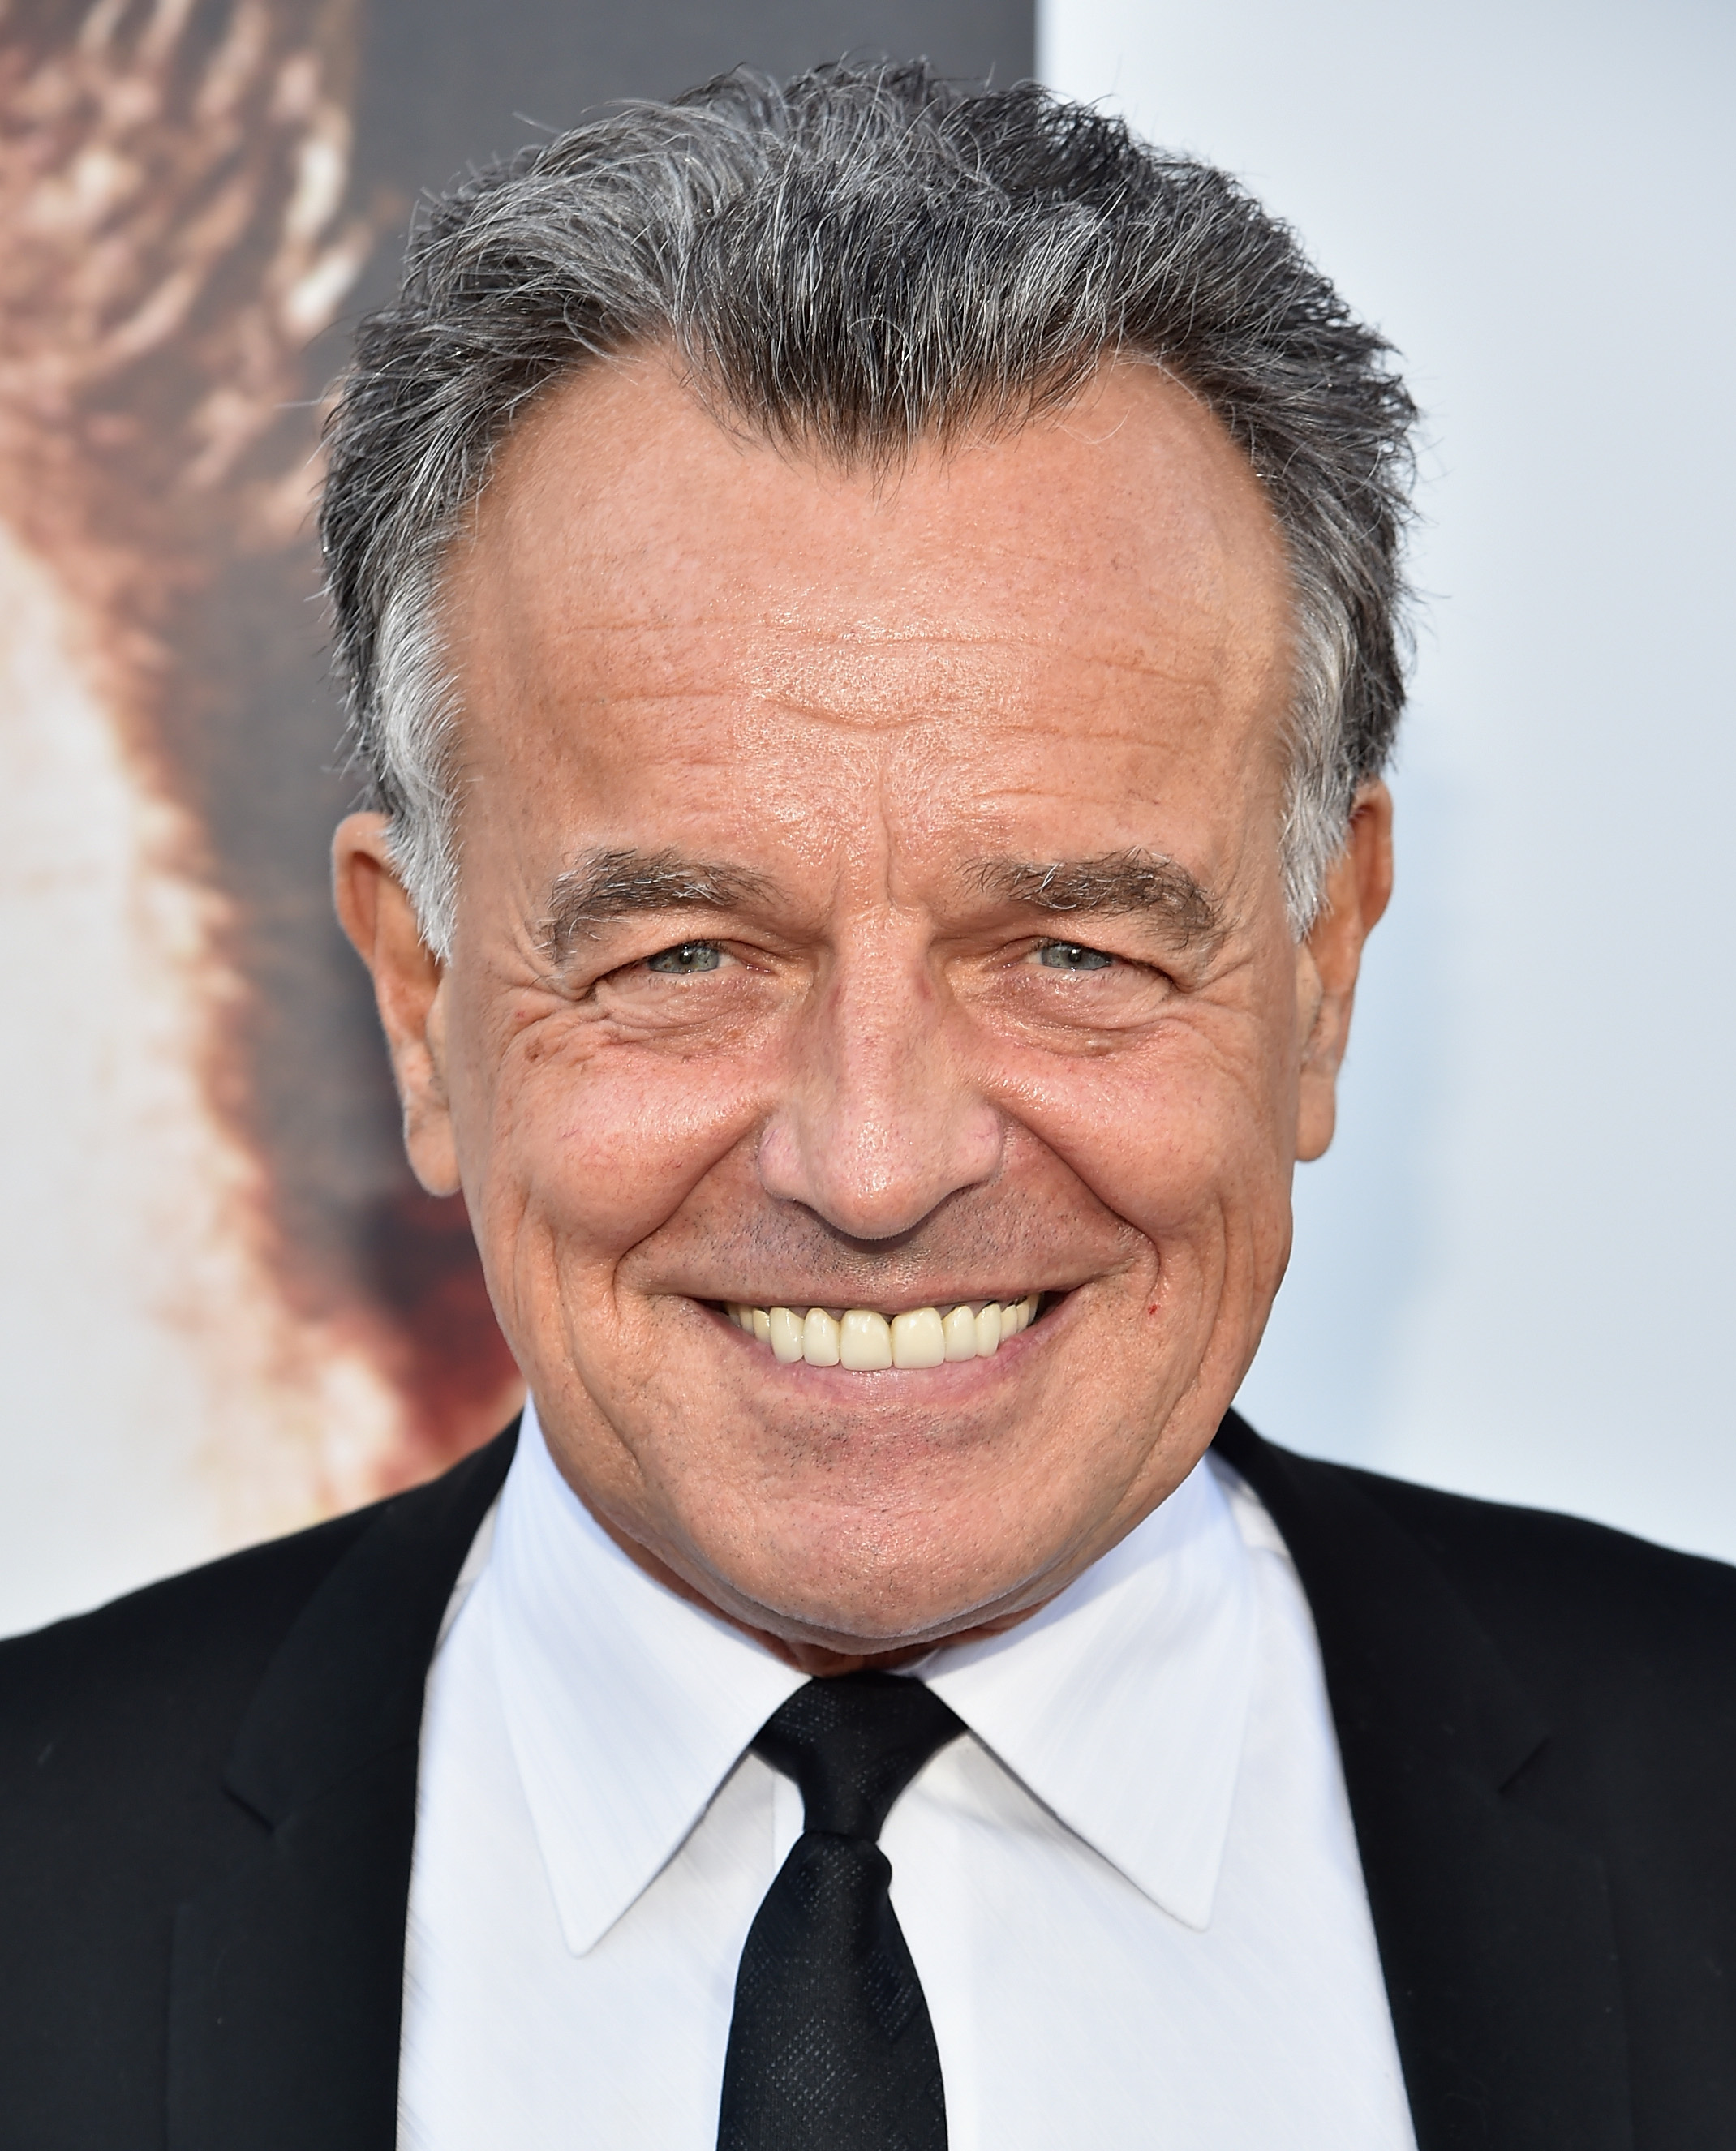 &#39;Twin Peaks&#39; 2016 News: Ray Wise Tweets About Being &#39;Between Two Worlds,&#39; Is He Returning For New Season? [VIDEO] : Videos : ENSTARZ - ray-wise